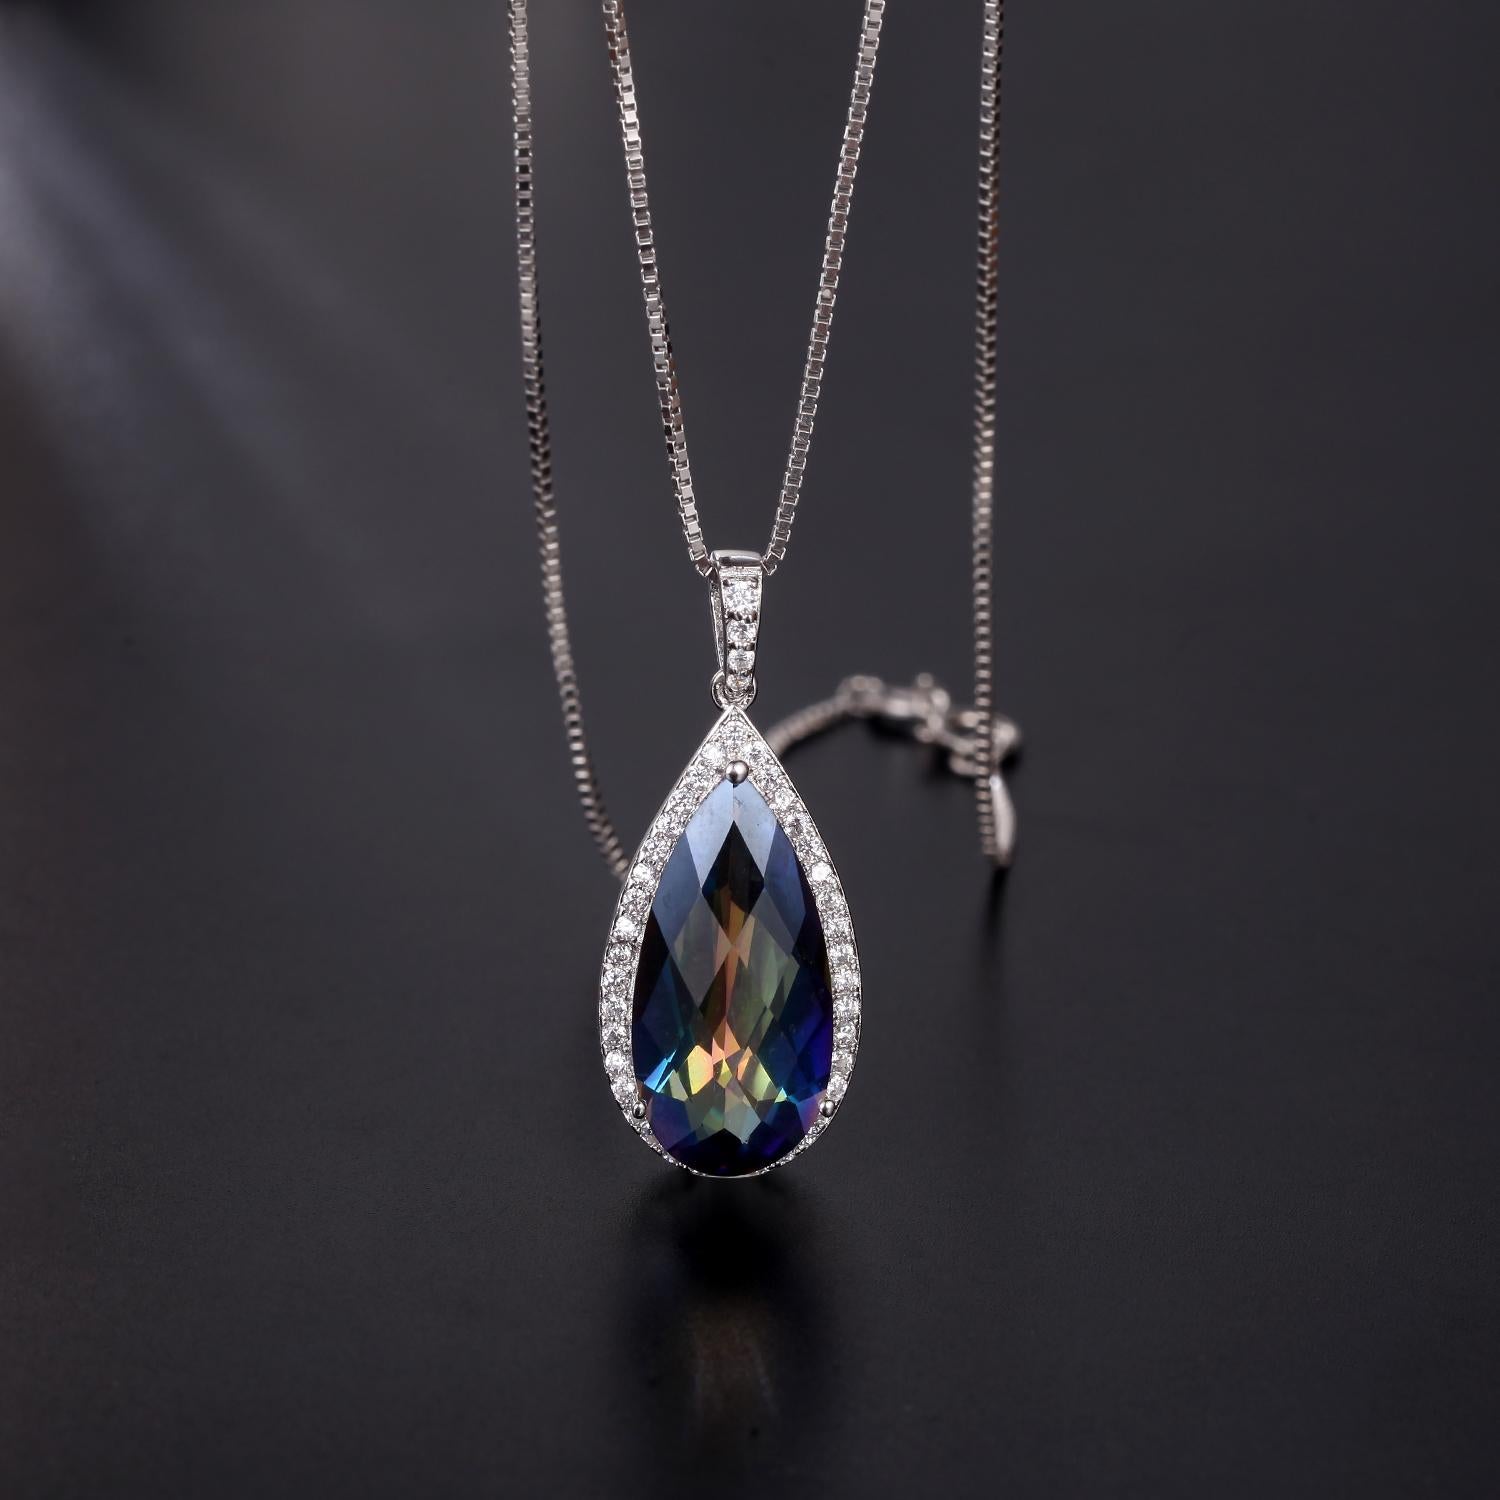 GEM&#39;S BALLET 7.89Ct 10x20mm Pear Shape Rainbow Mystic Topaz Gemstone Halo Pendant Neckace in Sterling Silver Gift For Her